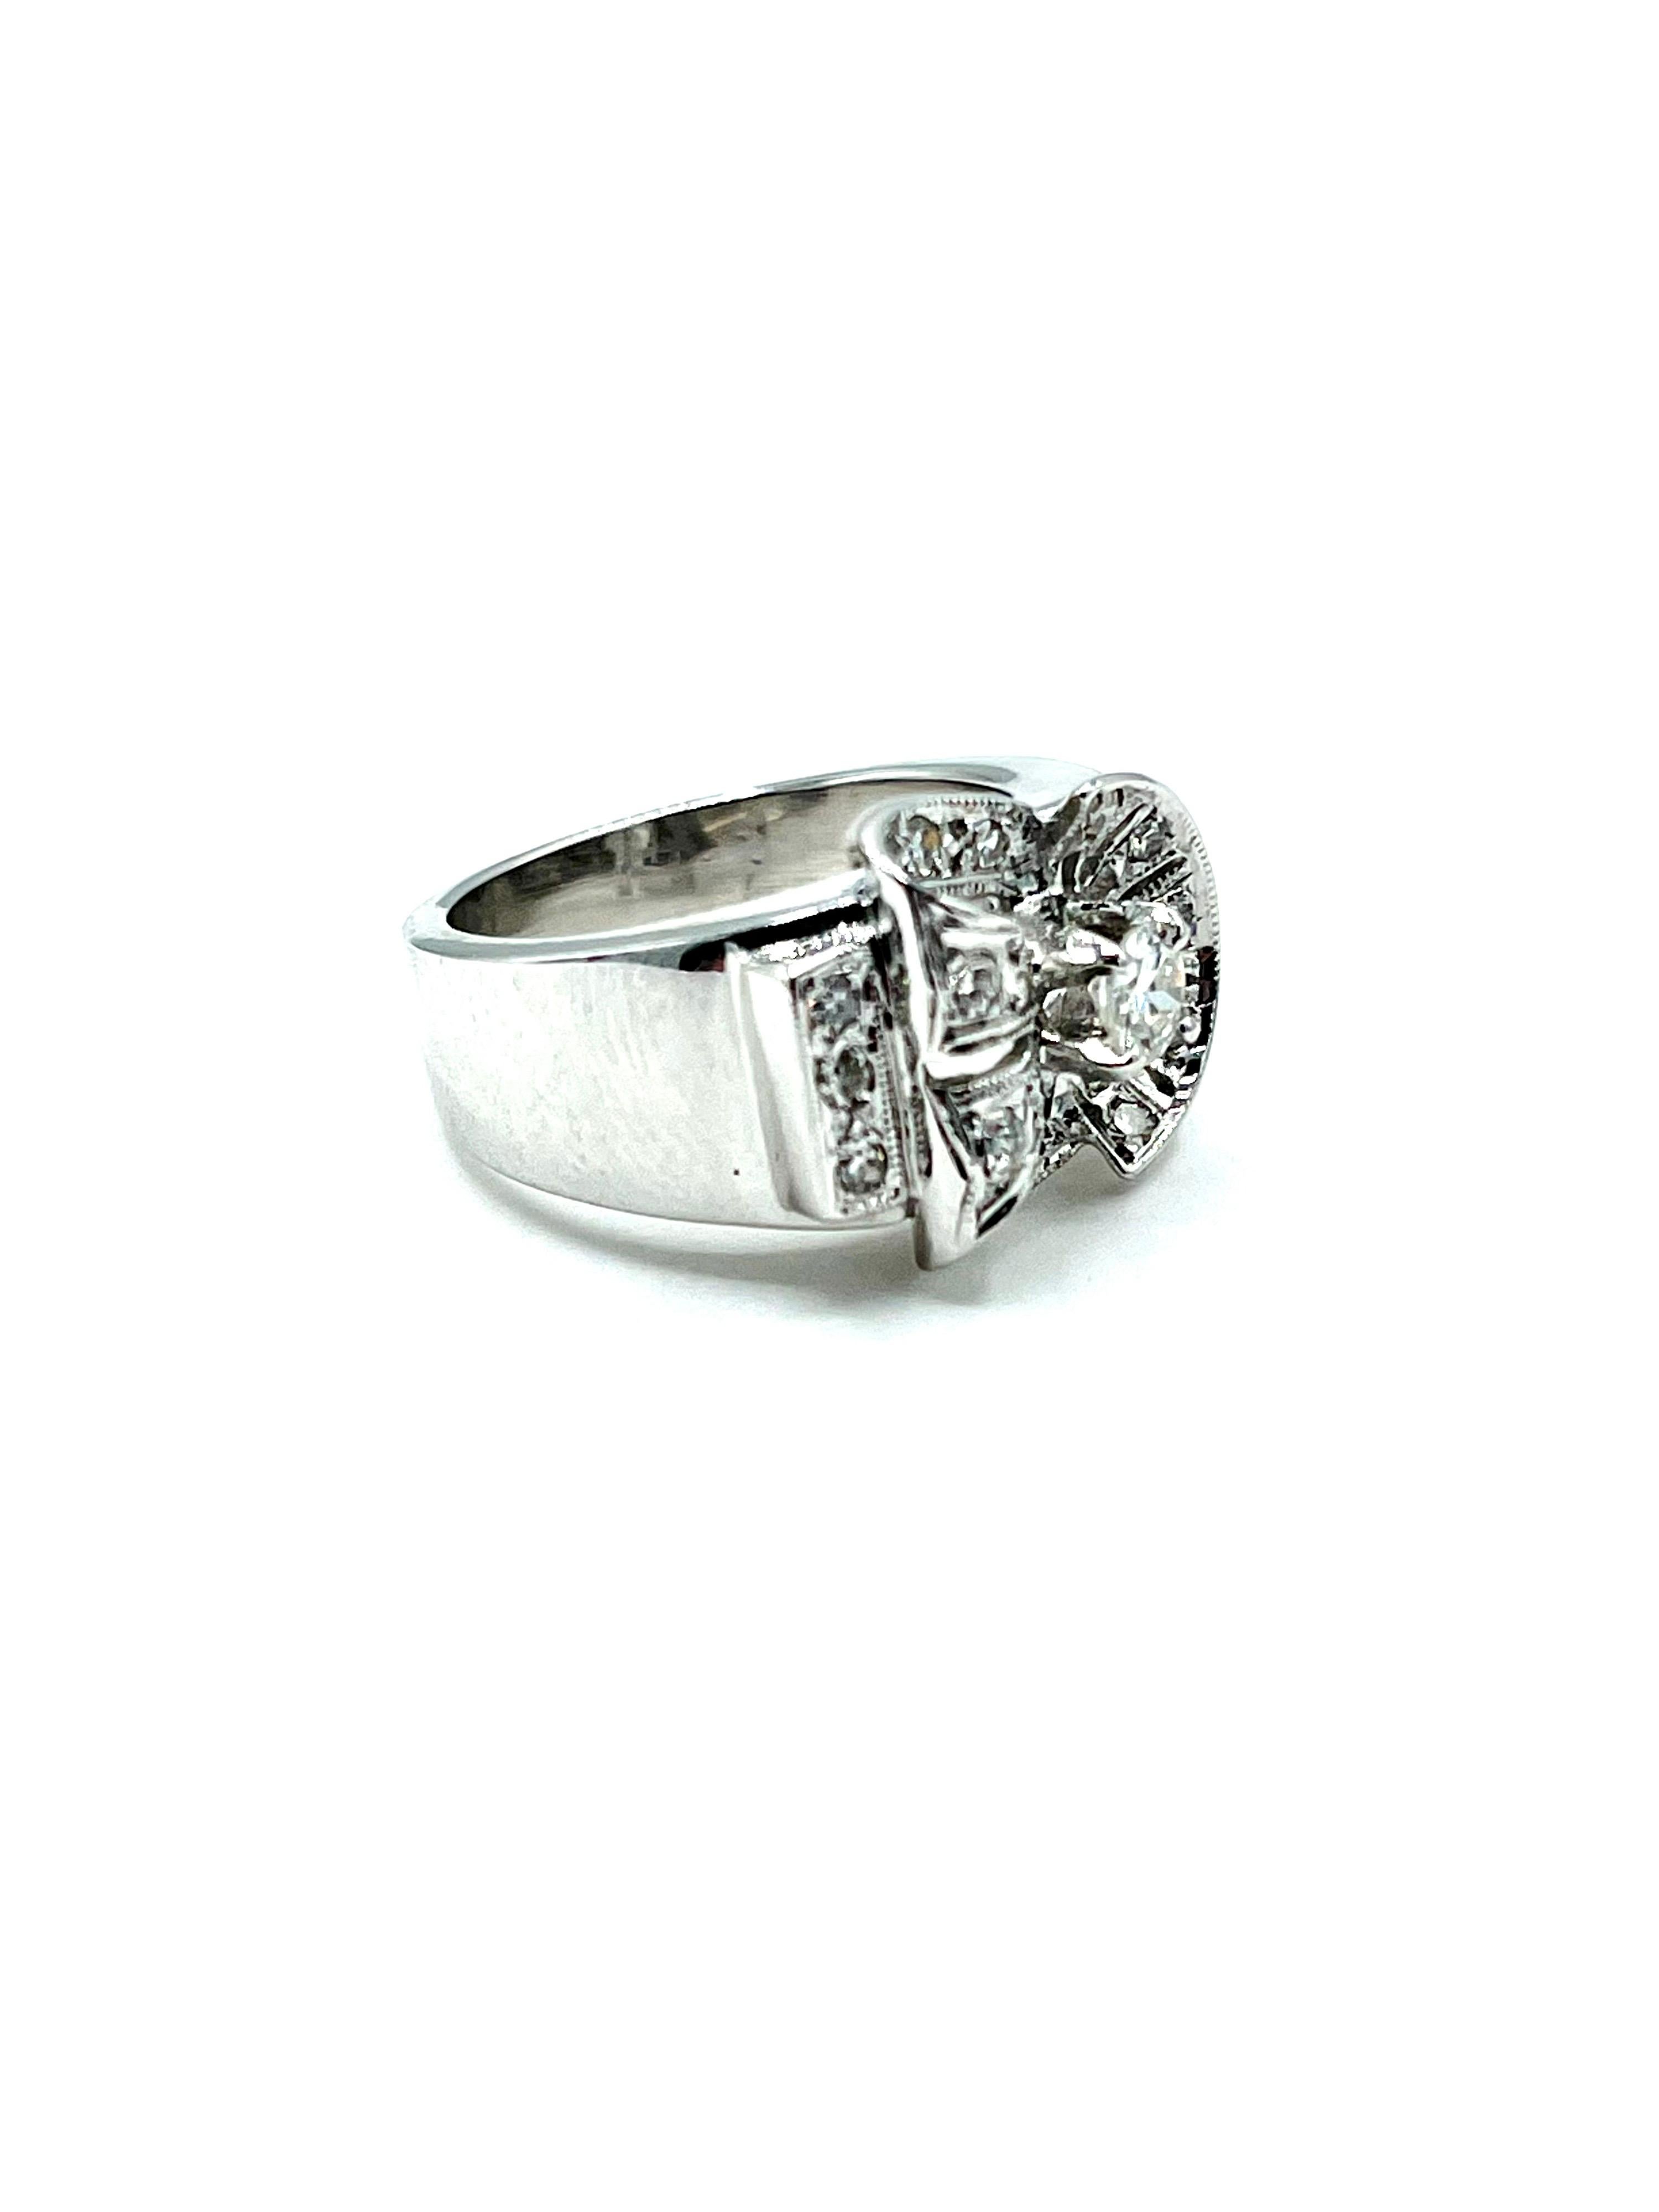 Art Deco Era Round Diamond White Gold Cocktail Fashion Ring In Excellent Condition For Sale In Chevy Chase, MD